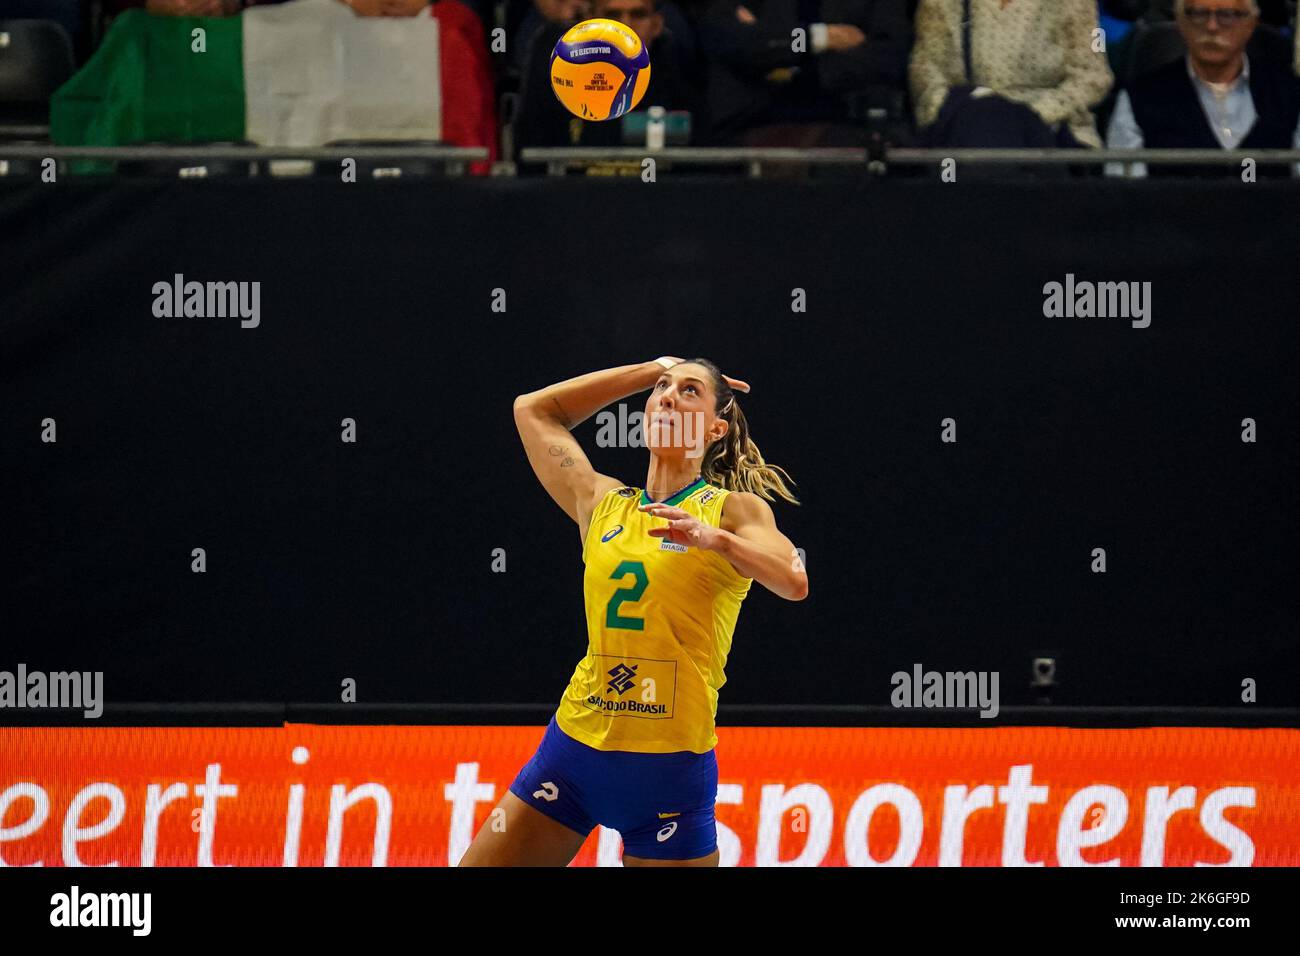 APELDOORN, NETHERLANDS - OCTOBER 13: Caroline De Oliveira Saad Gattaz of  Brazil serves during the Semi Final match between Italy and Brazil on Day  19 of the FIVB Volleyball Womens World Championship